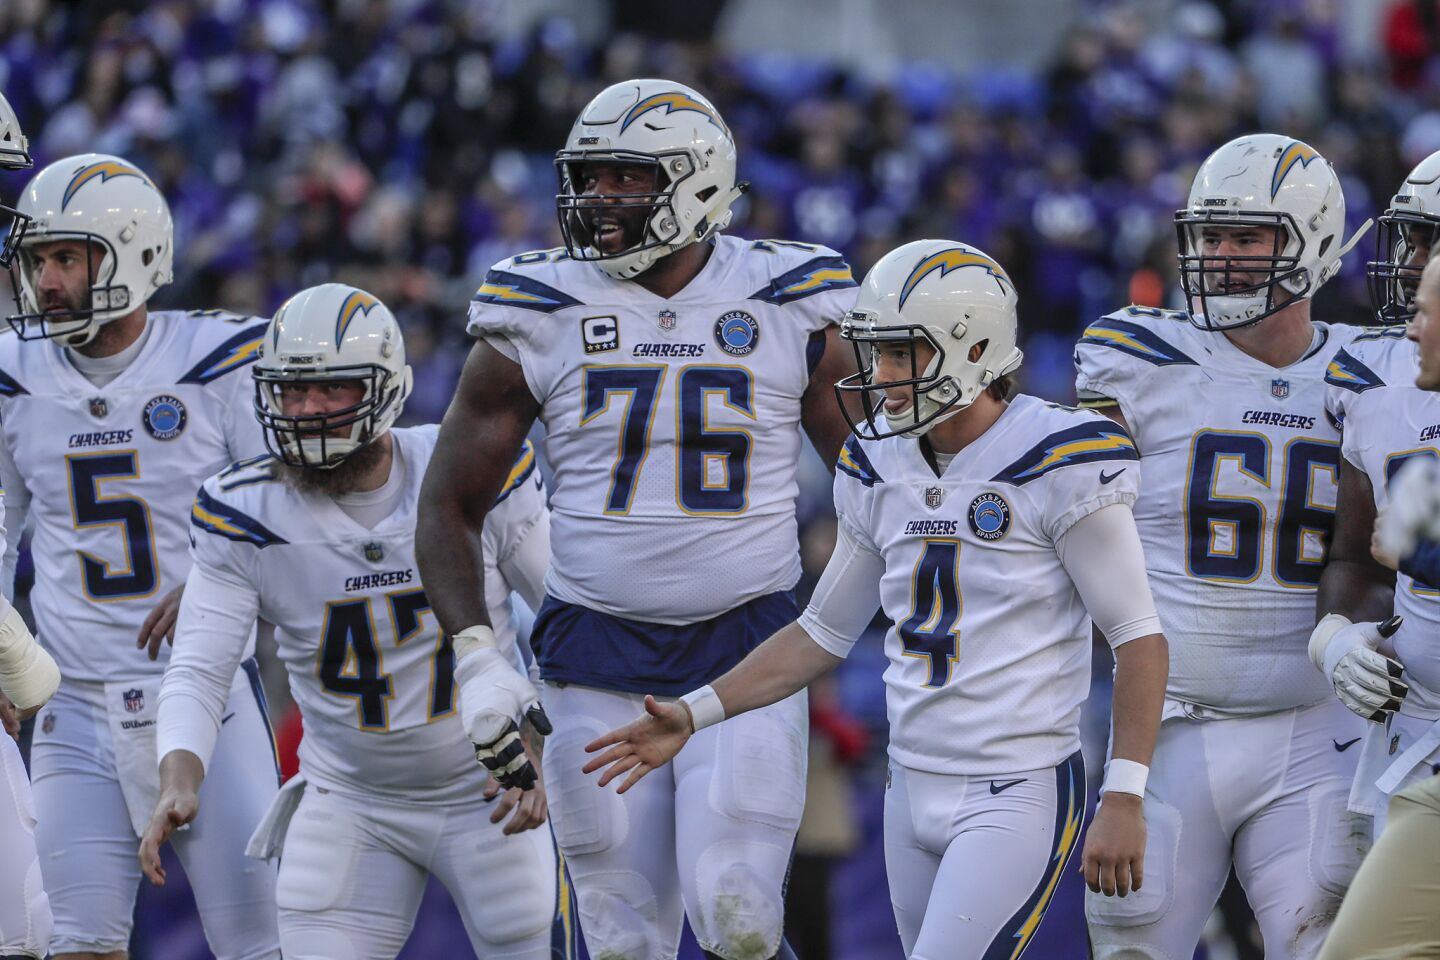 Chargers kicker Michael Badgley is congratulated by teammates after hitting a 34-yard field goal in the second quarter in the AFC wild-card playoff game.